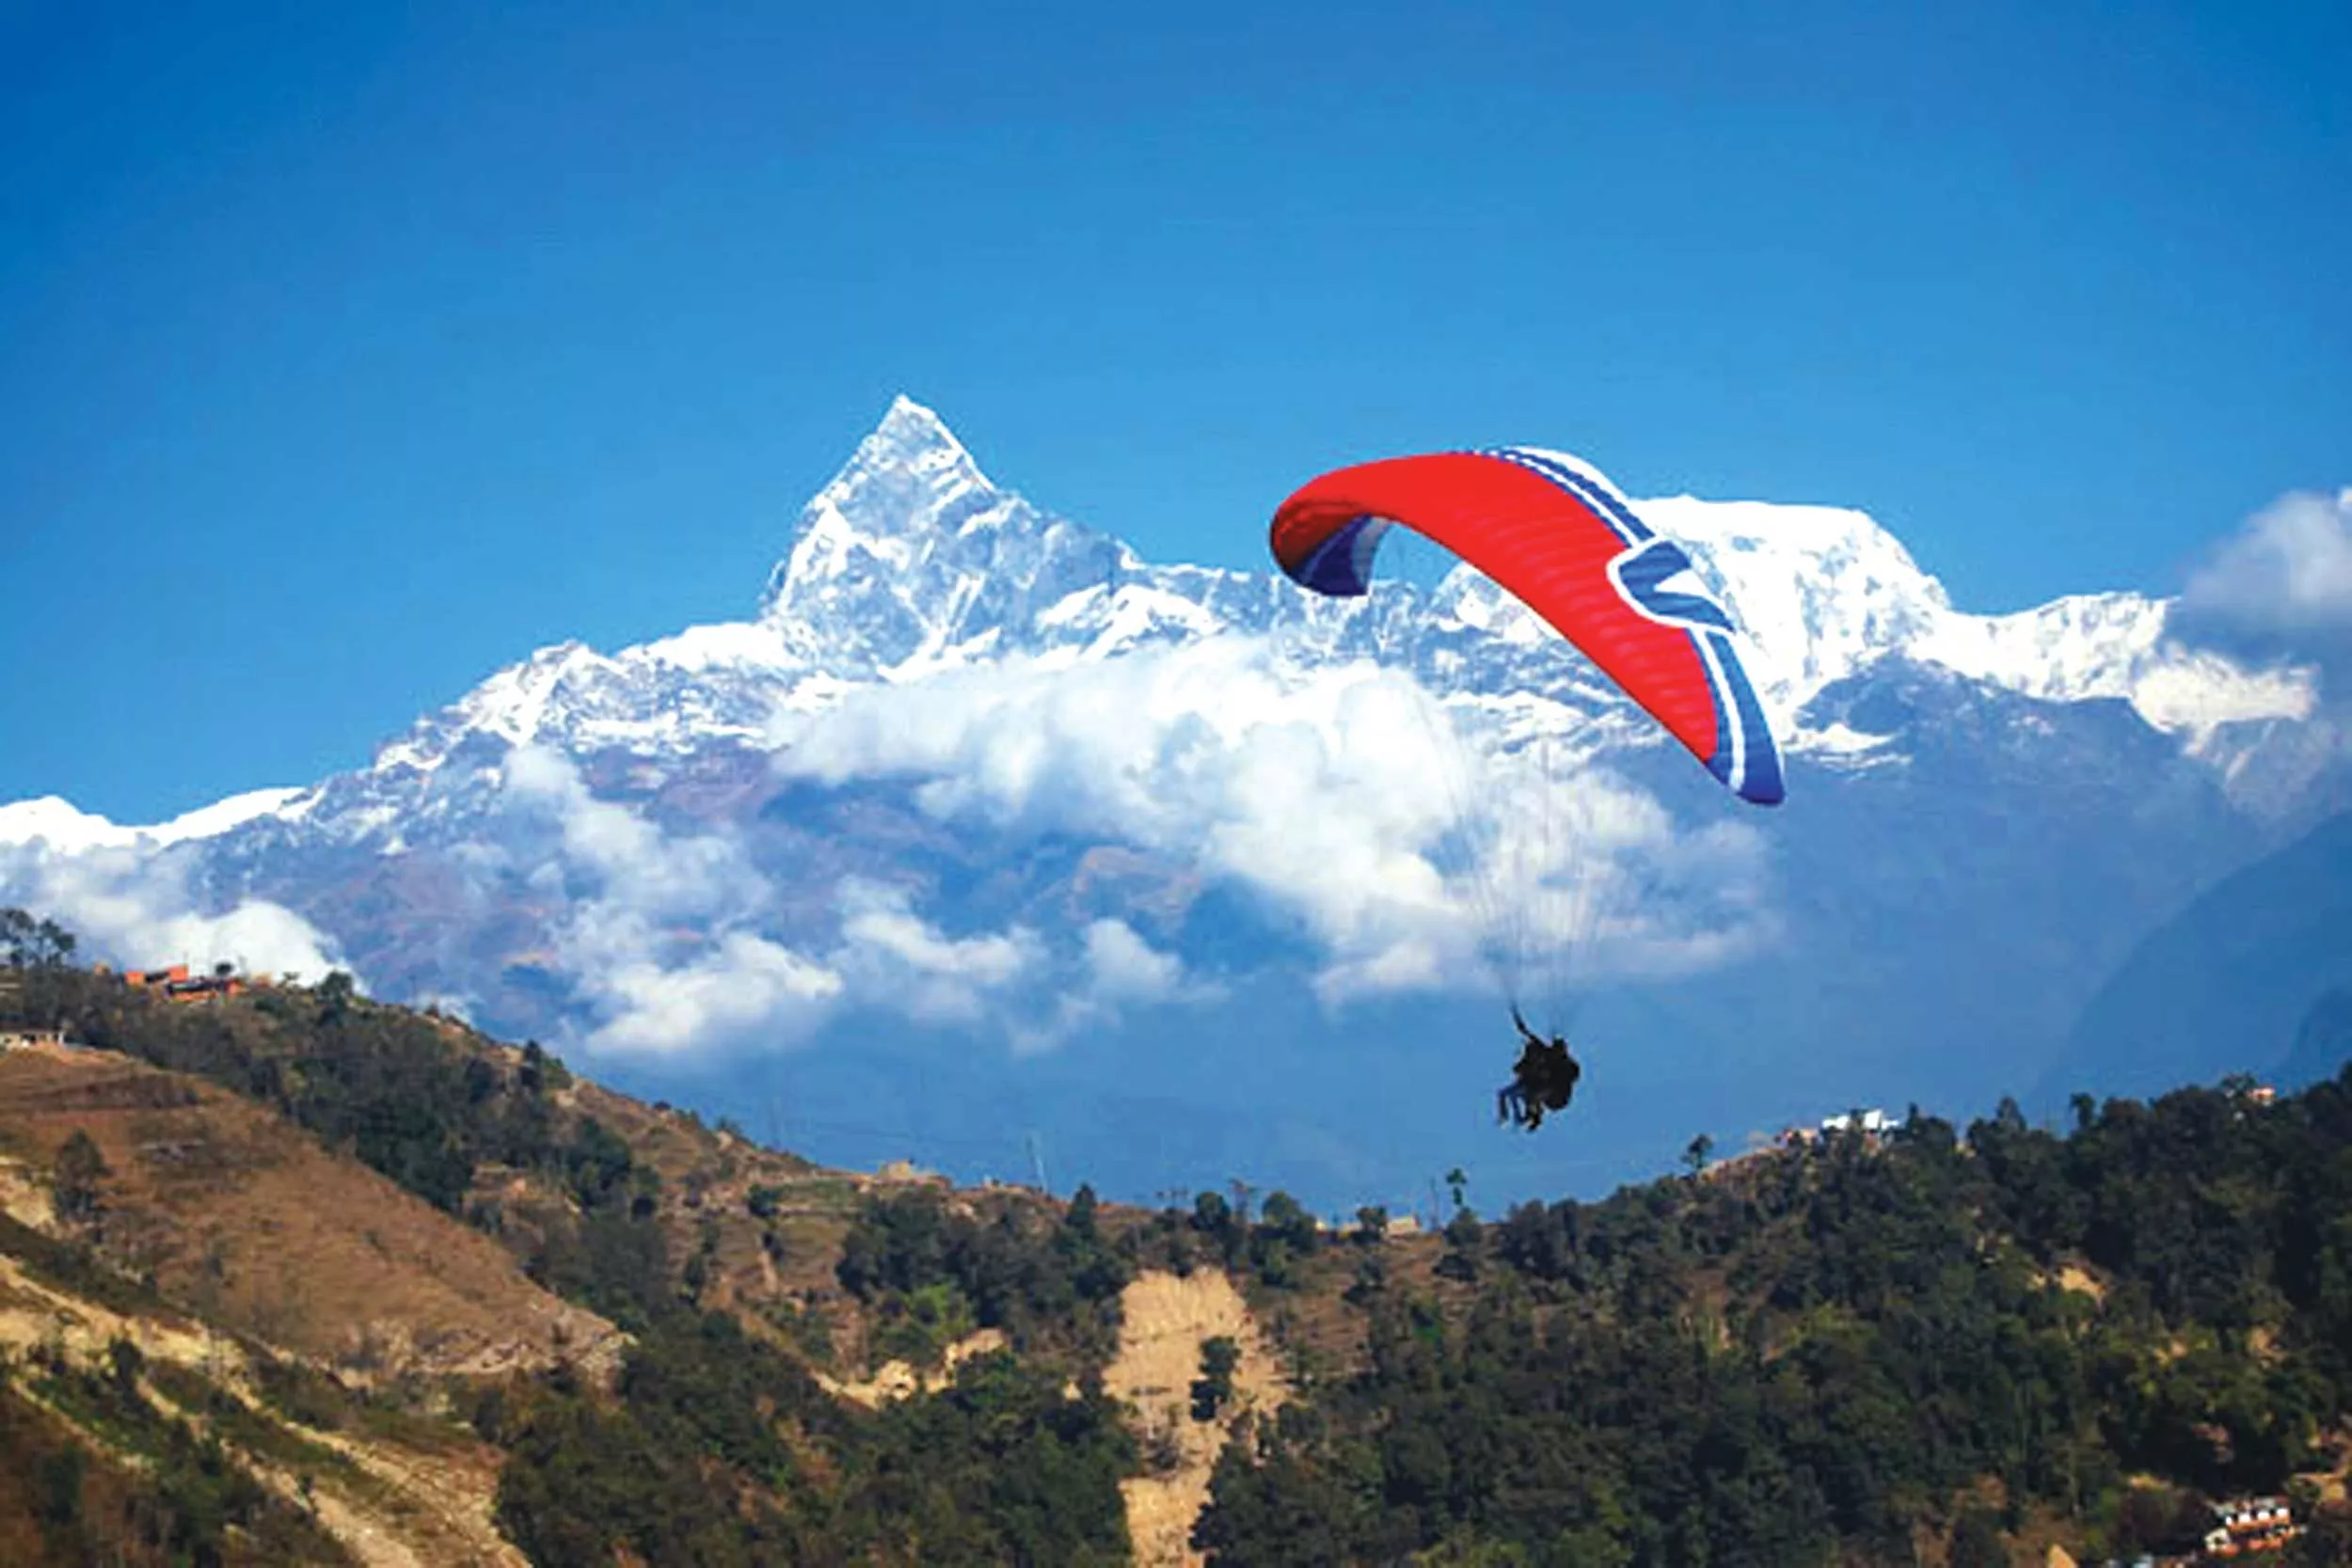 Team 5 Nepal Paragliding in Nepal, Central Asia | Paragliding - Rated 4.5